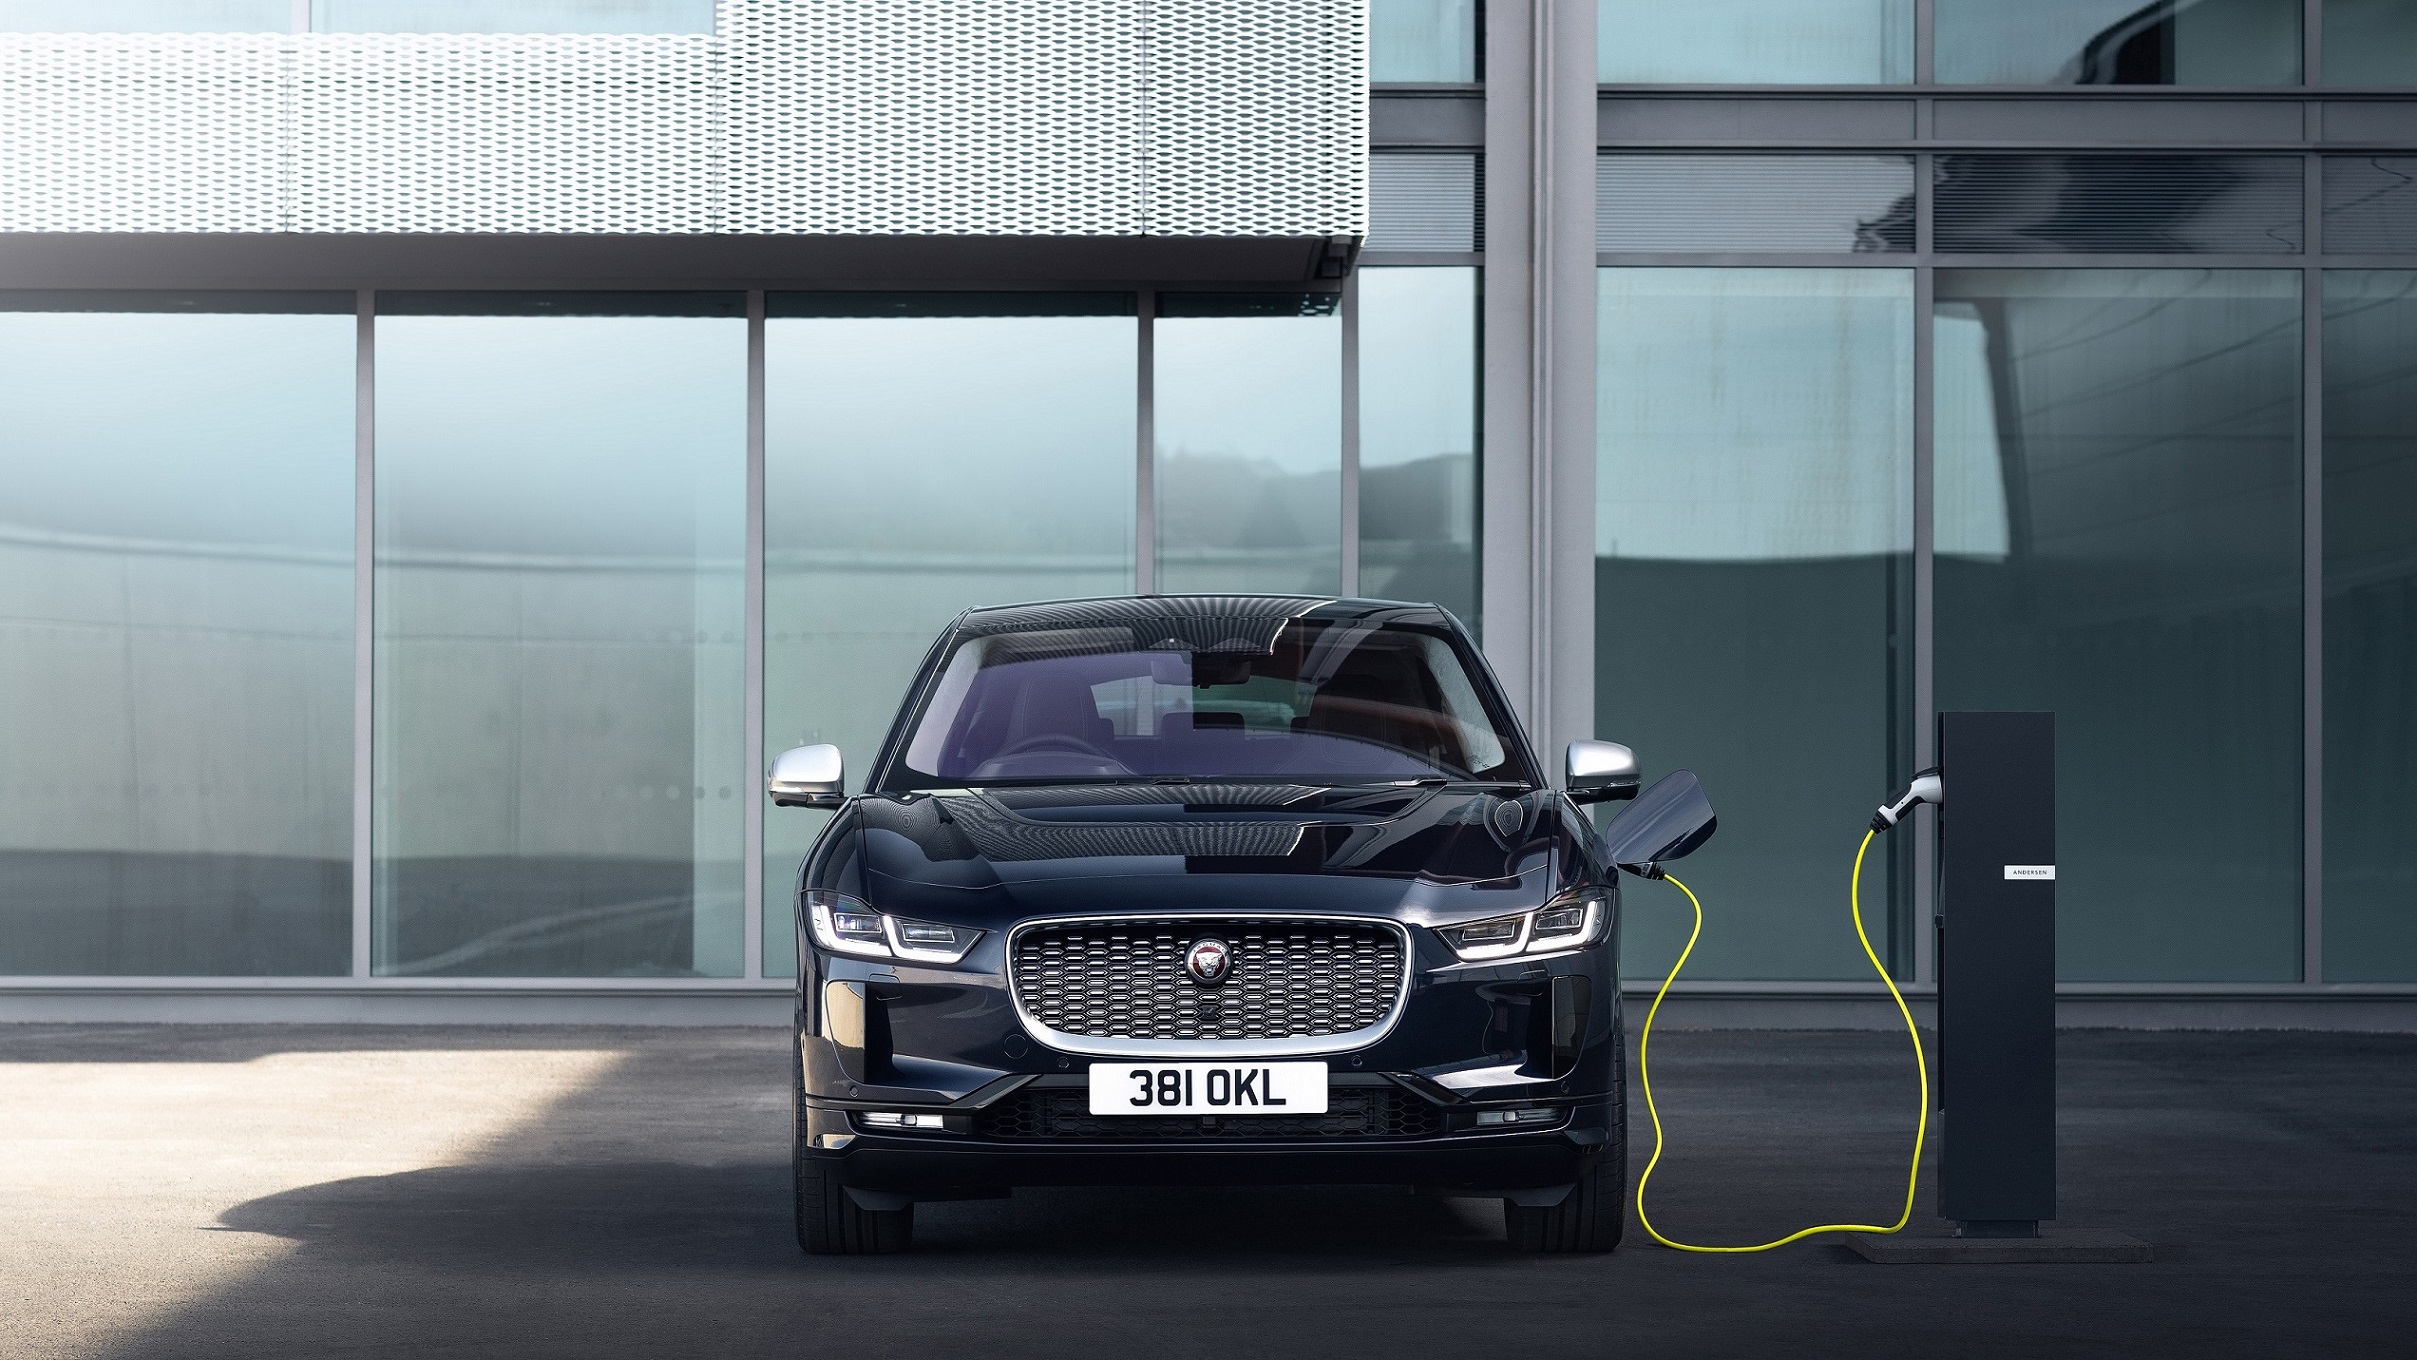 Image for Jaguar Land Rover Upcycles Aluminium To Cut Carbon Emissions By A Quarter